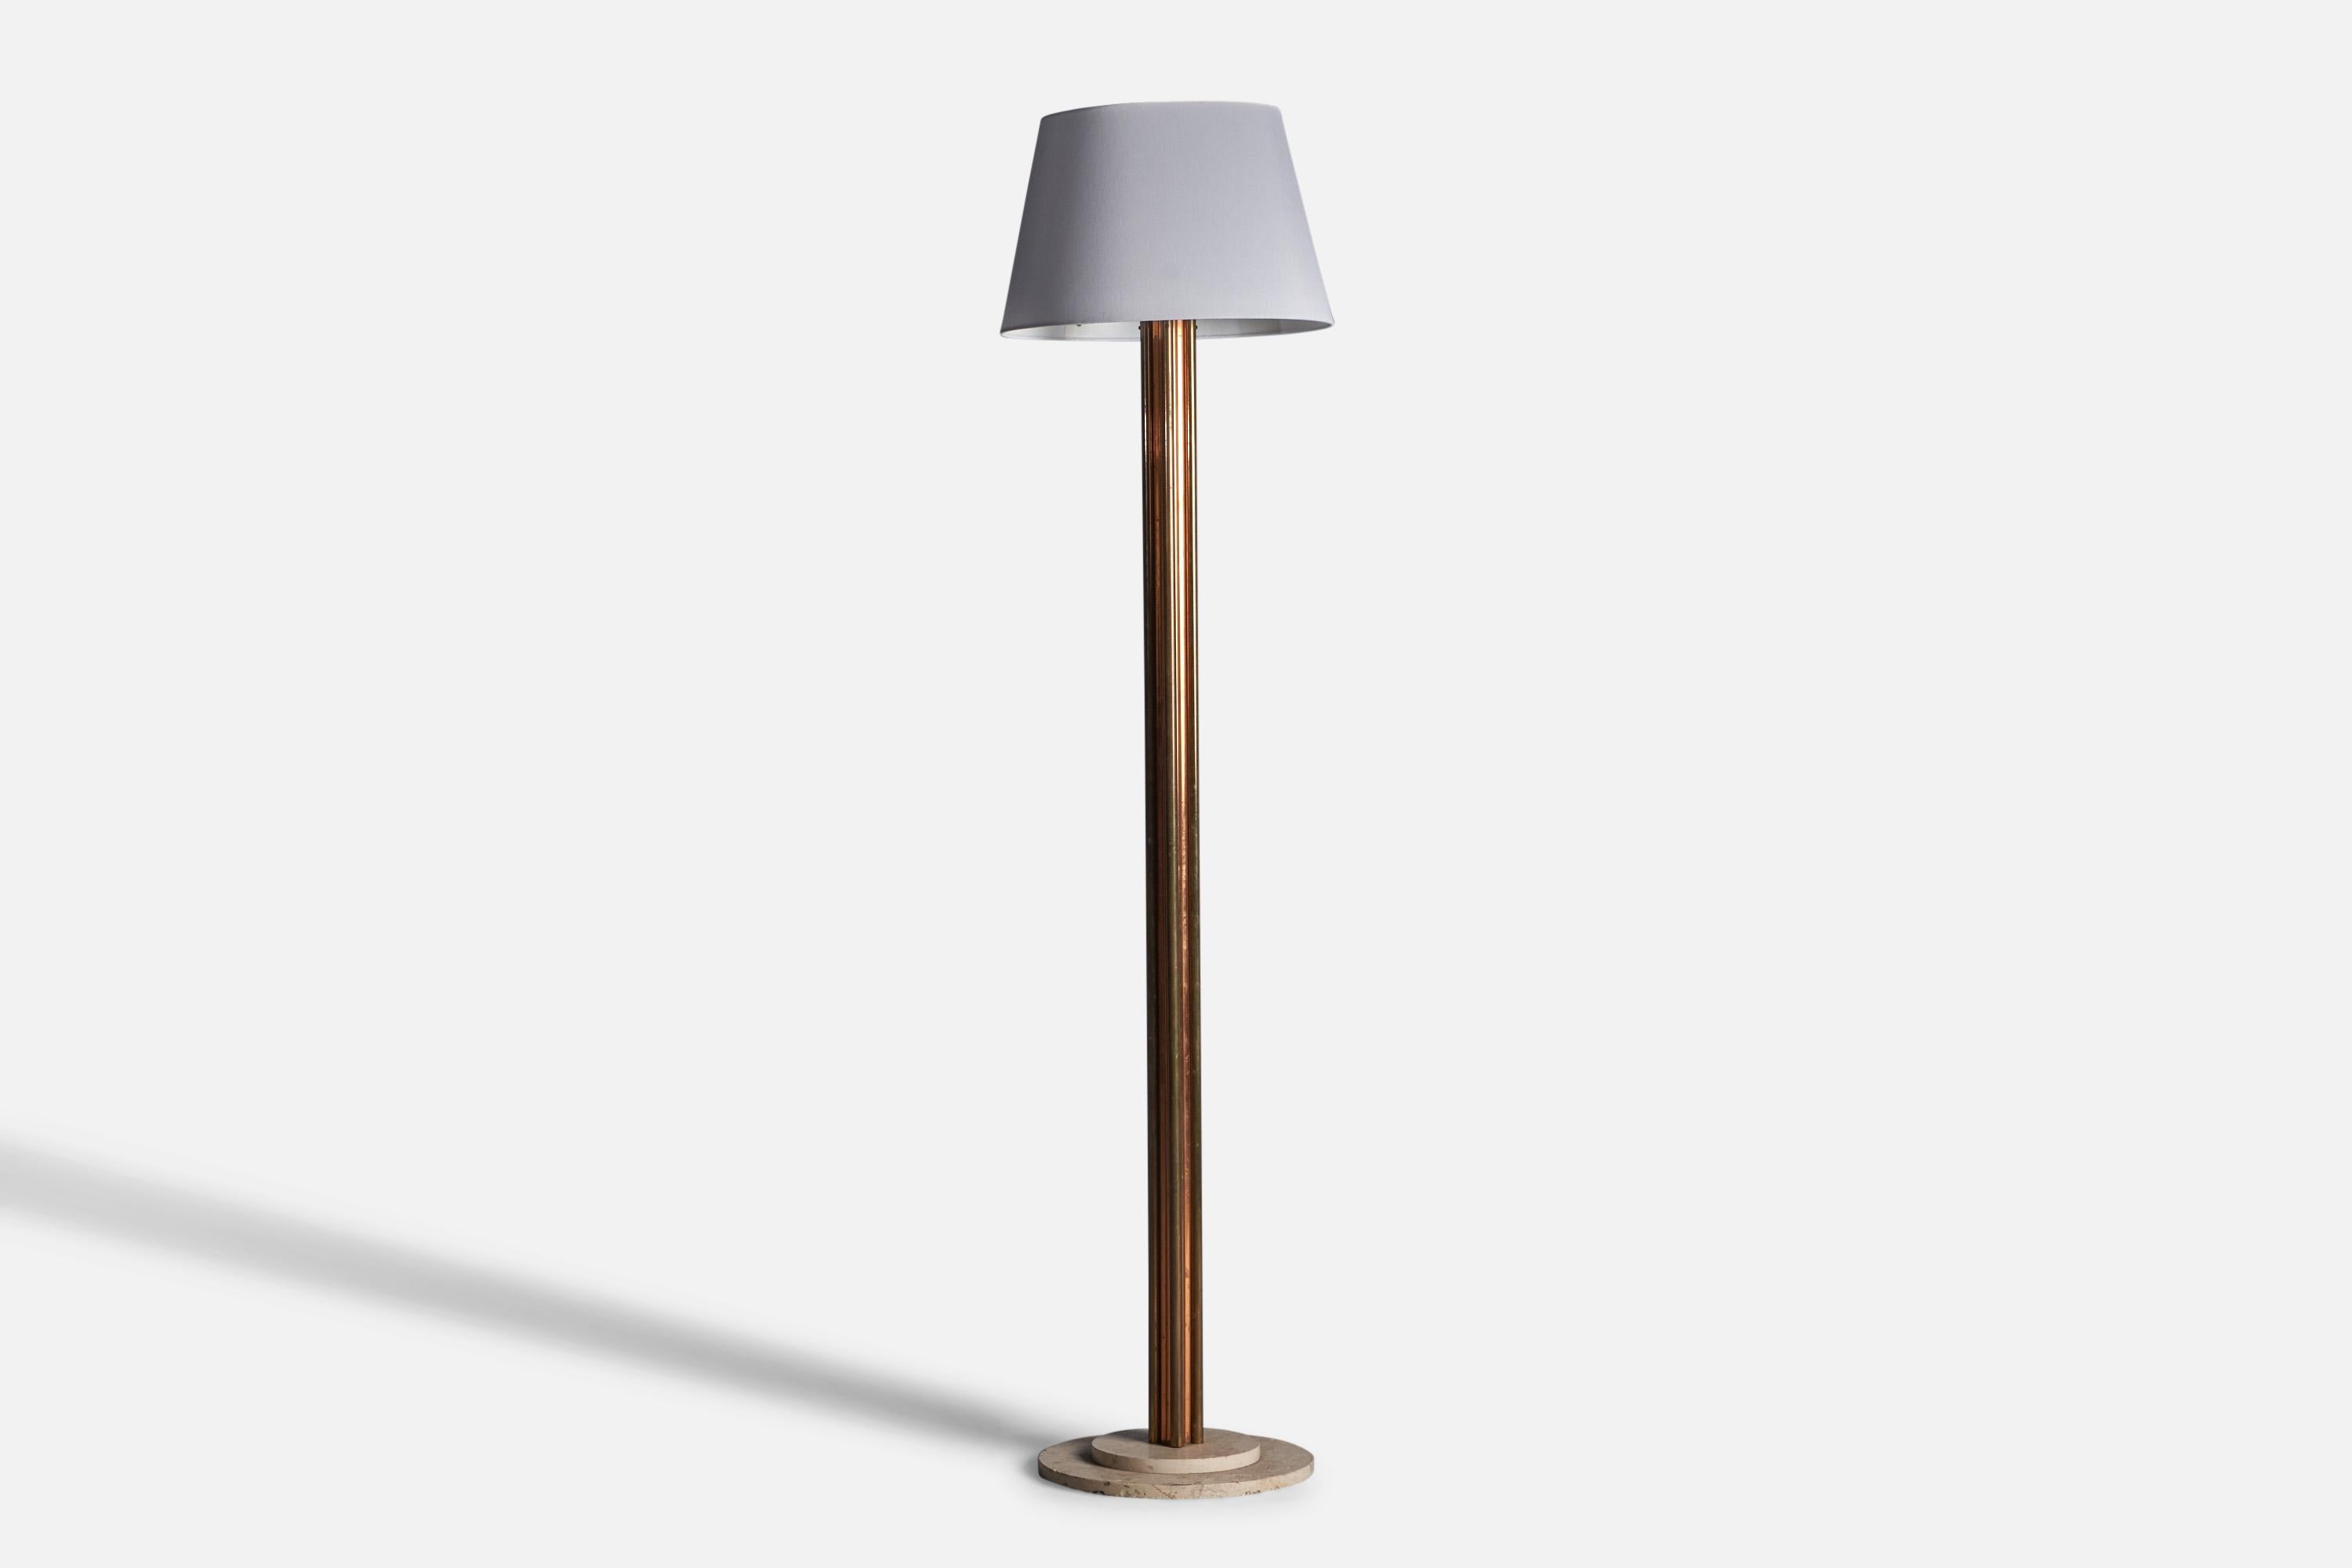 A sizeable brass, copper and travertine floor lamp, designed and produced in Italy, c. 1940s.

Overall Dimensions: 74.5